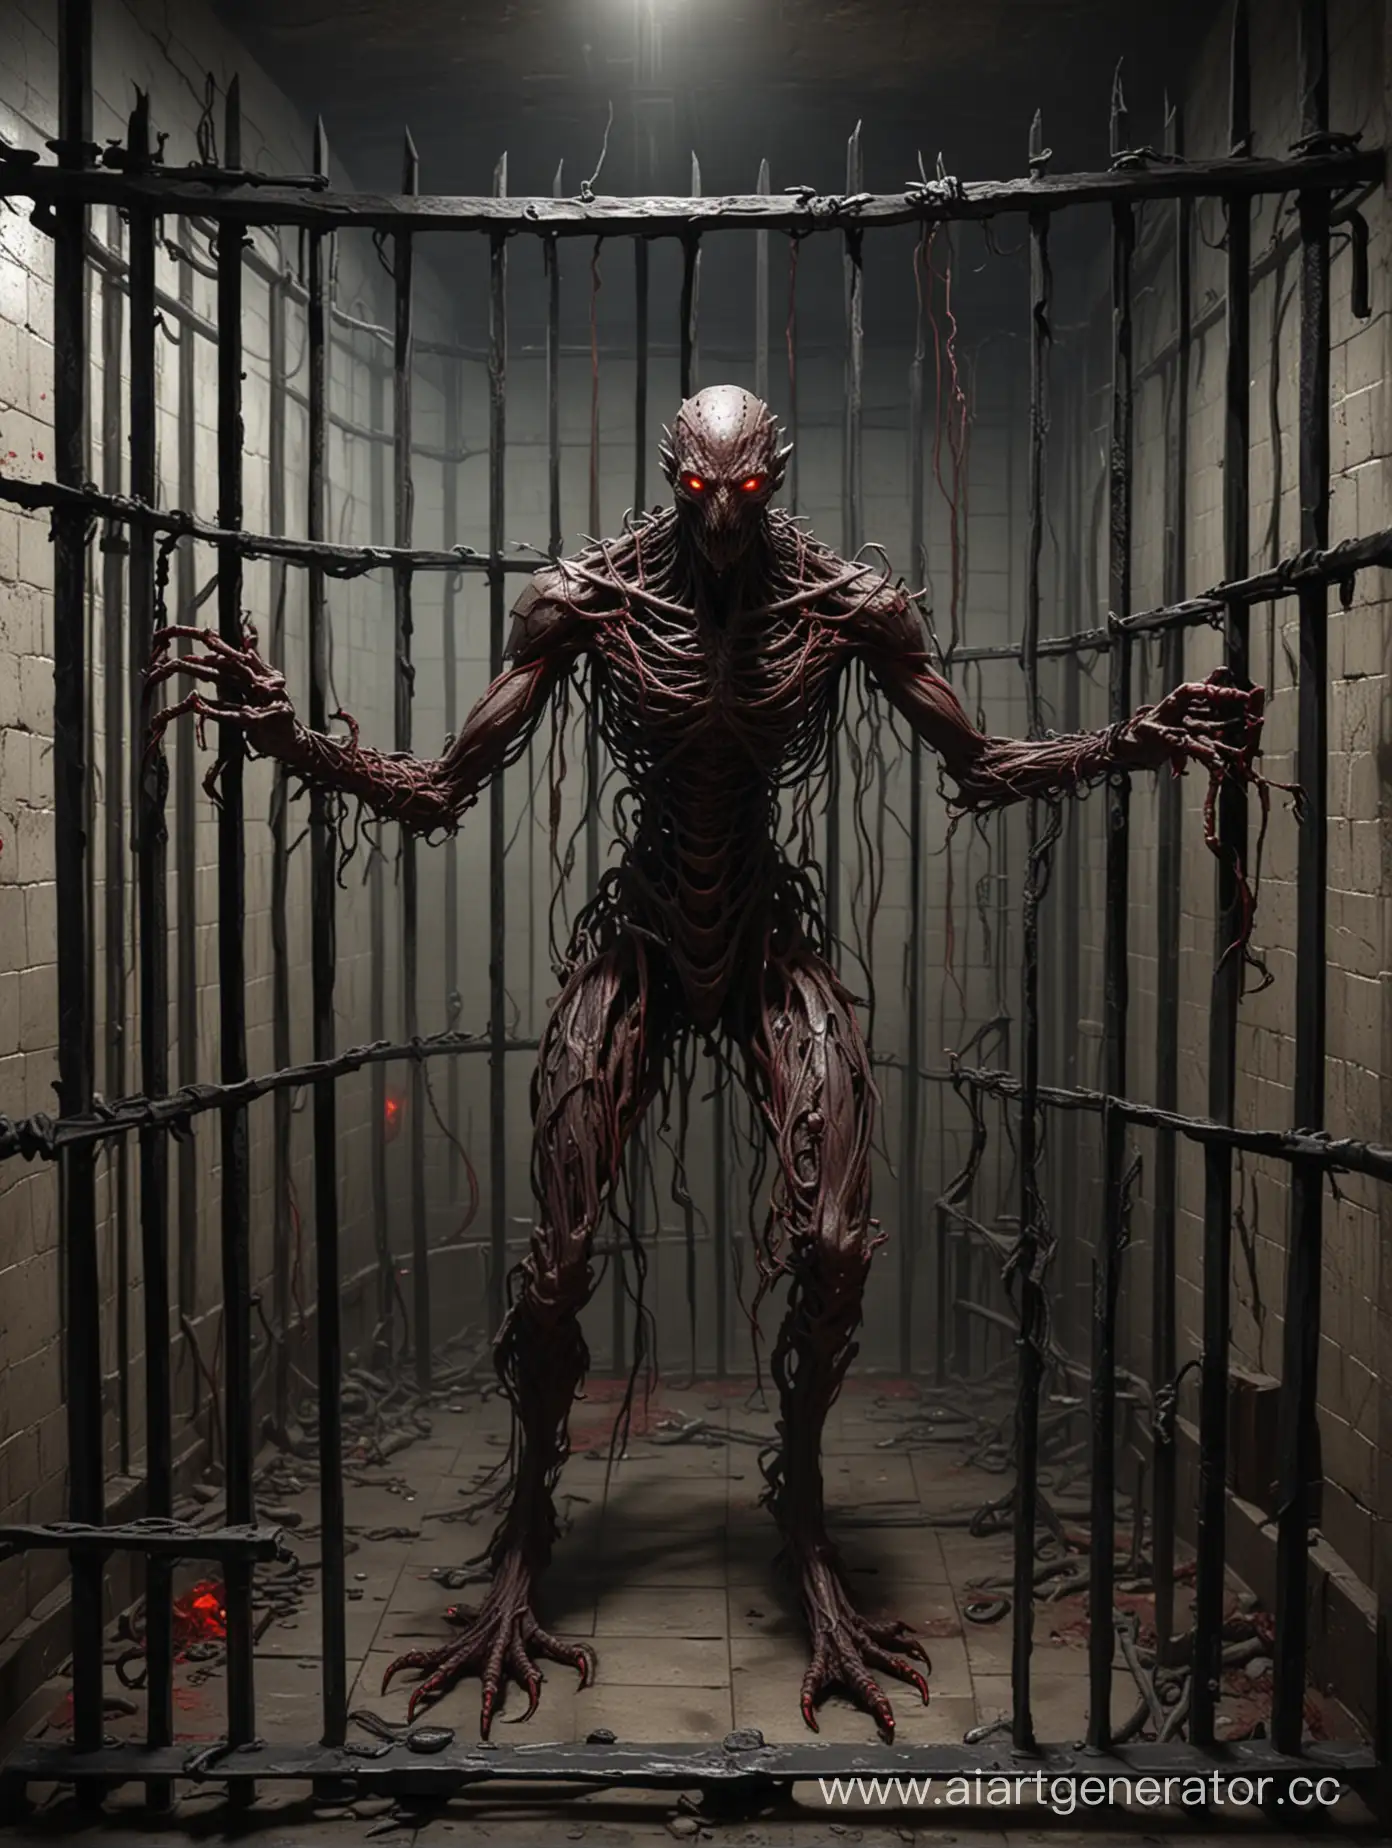 Dark-Humanoid-Creature-with-Crimson-Eyes-Trapped-in-a-RoomCage